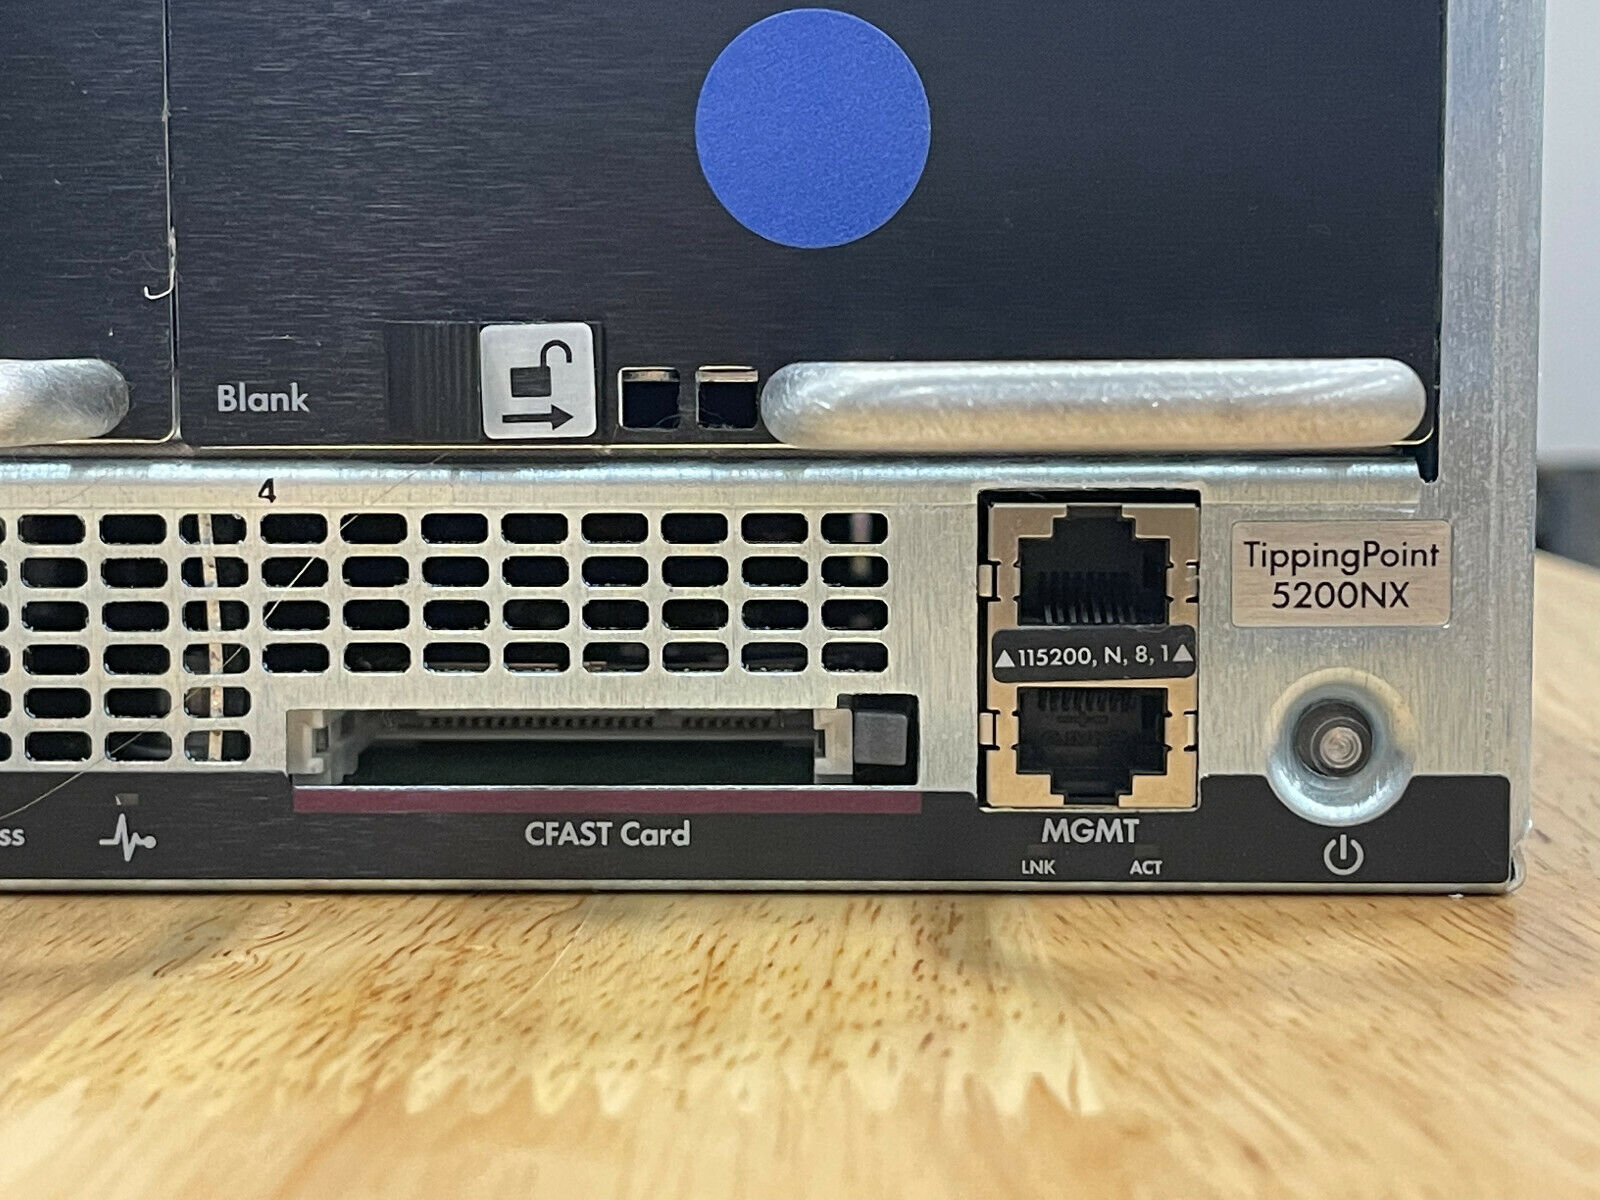 HPE JC770A TippingPoint S5200NX Next Generation Intrusion Prevention System 8x SFP+ 10G.